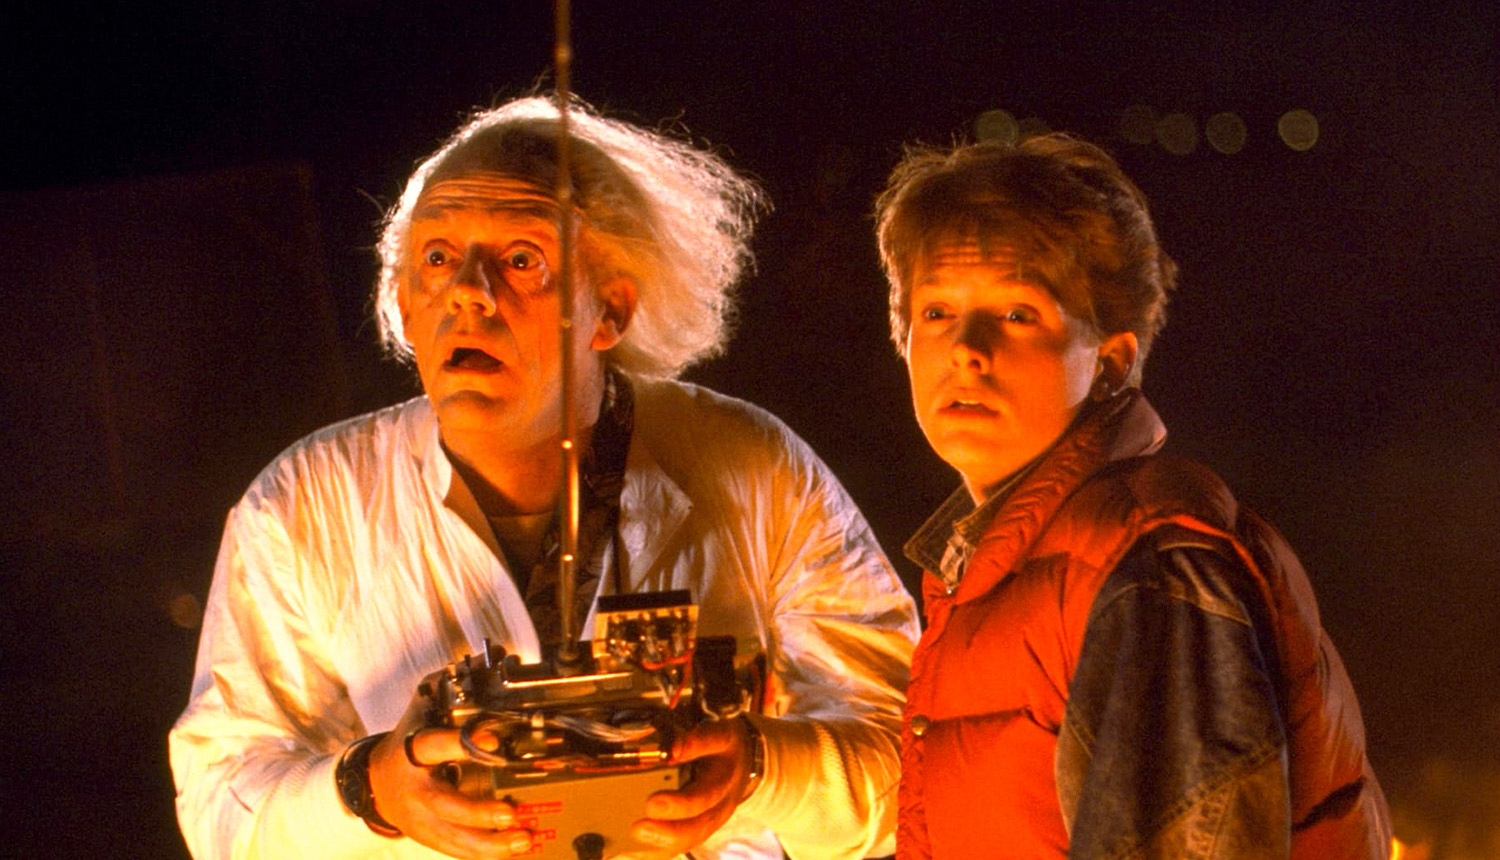 Totally Killer Review - Back to the Future gets the slasher movie treatment